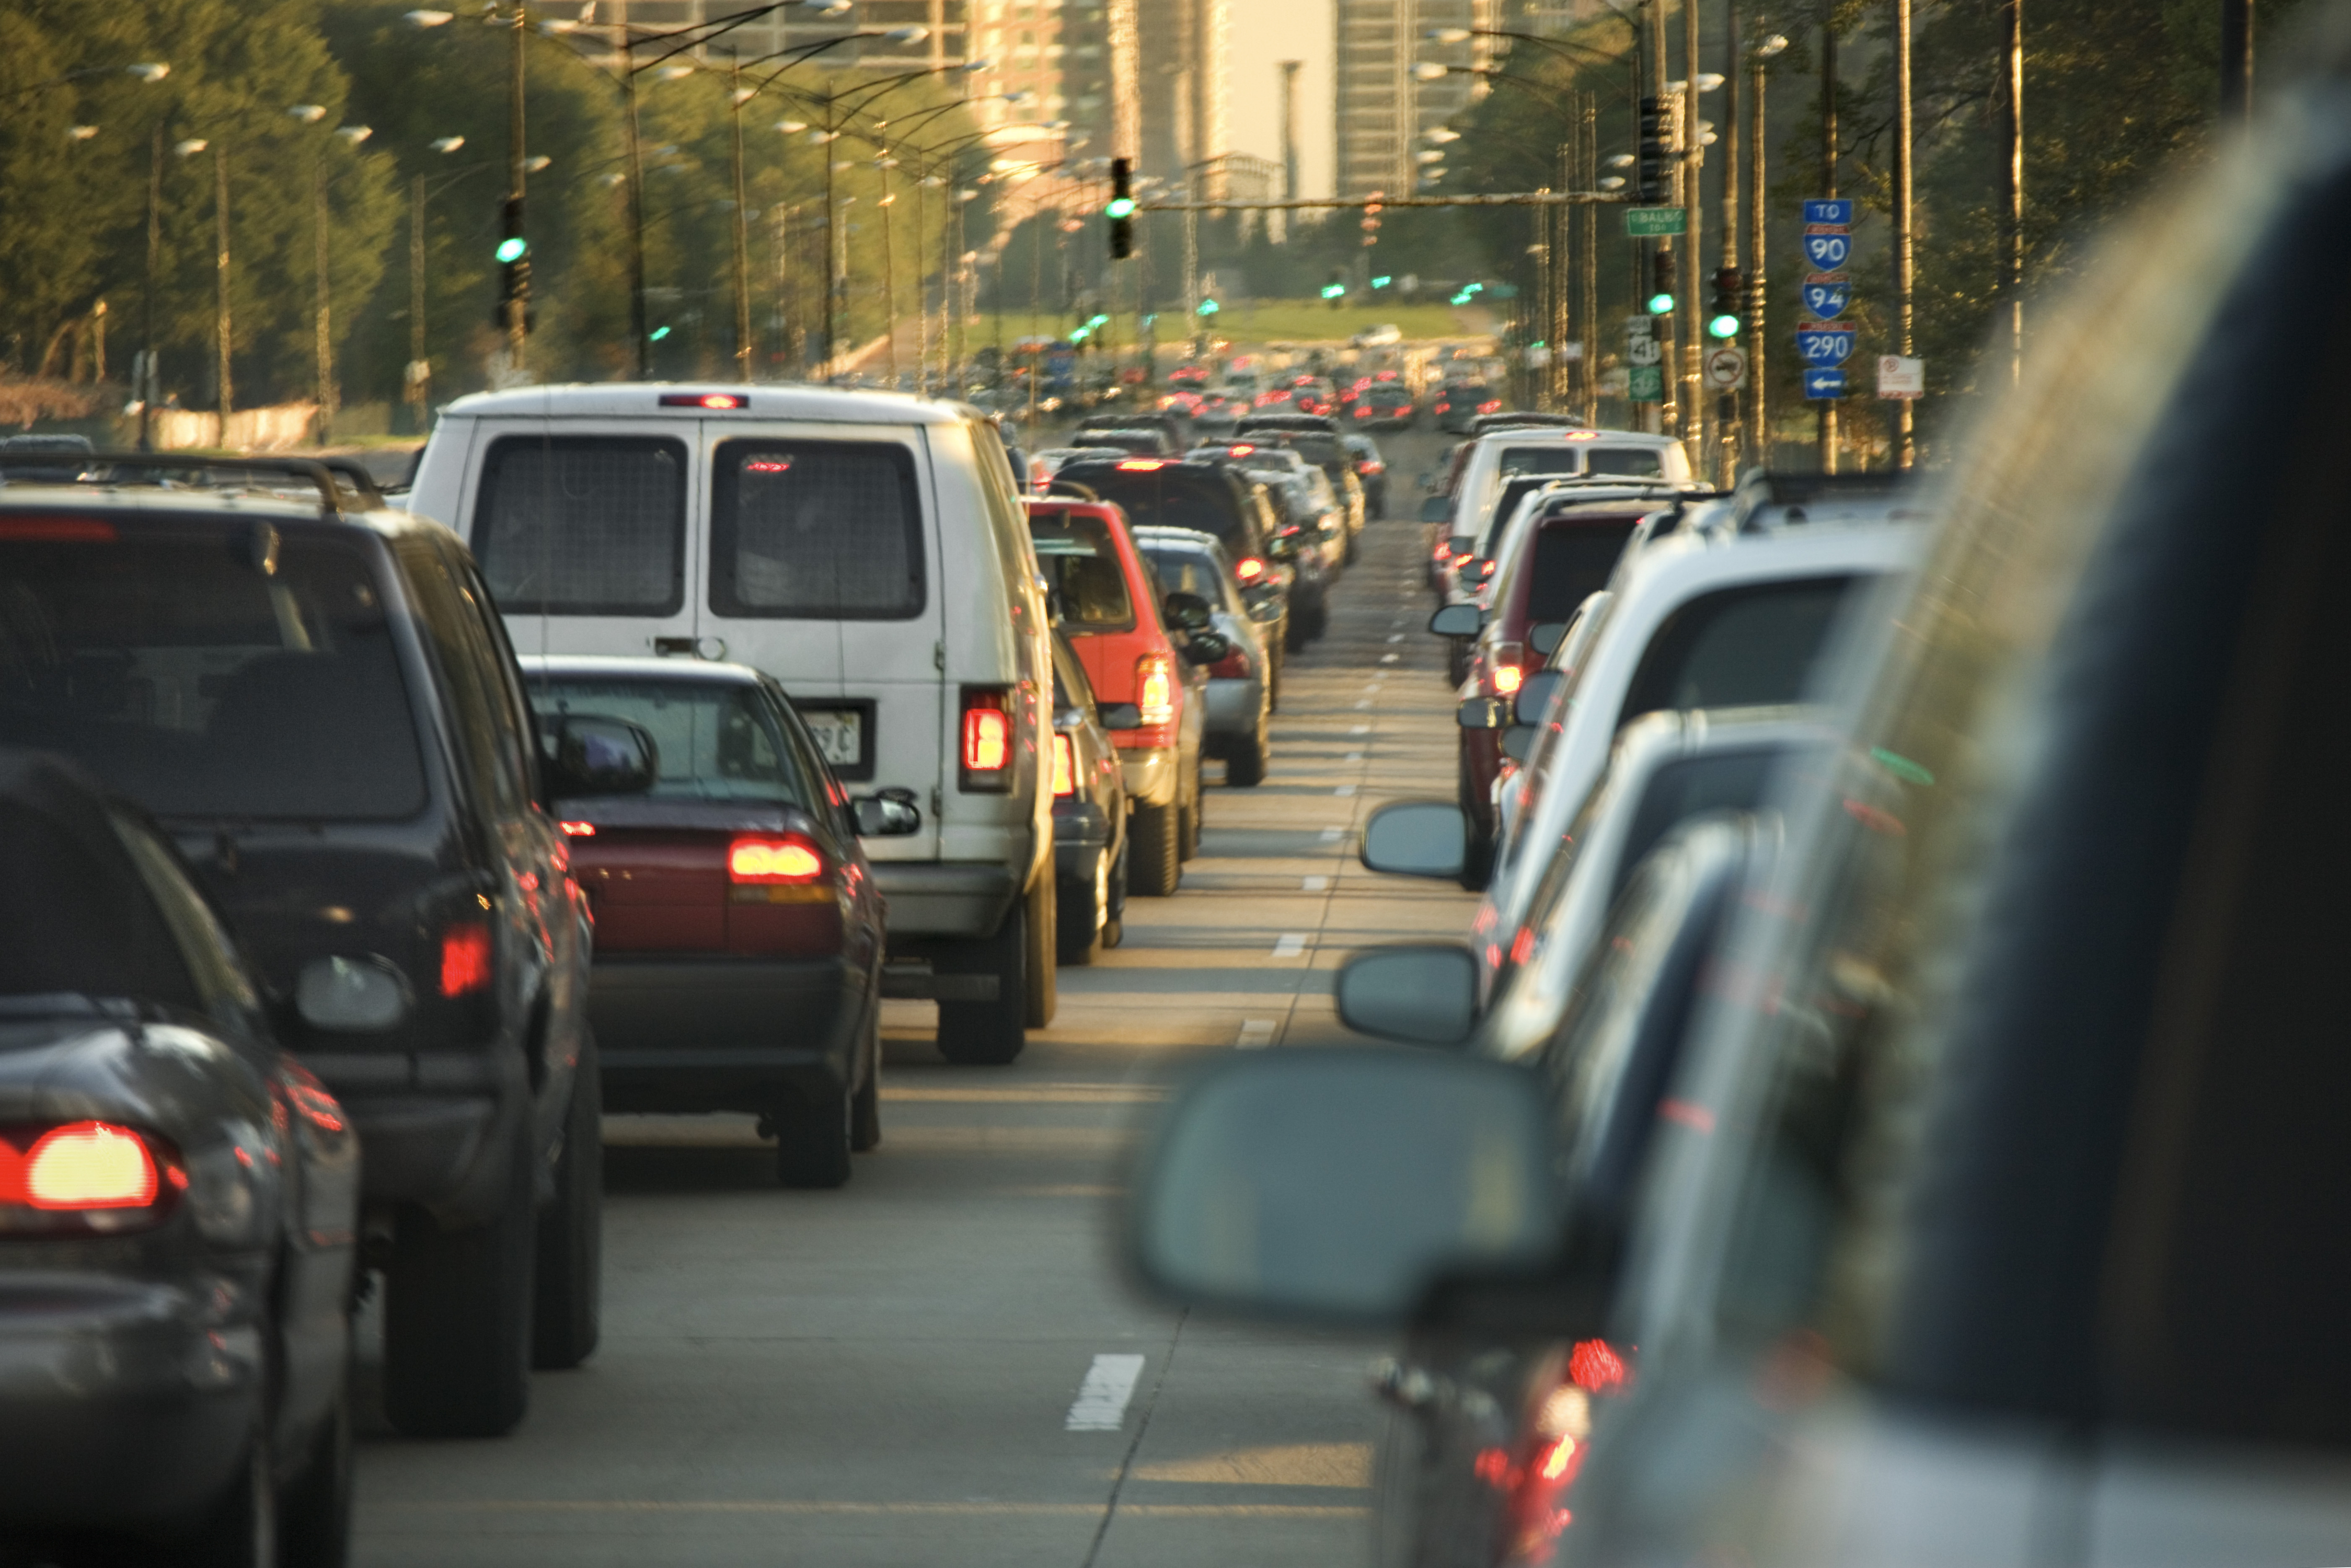 Chicago's rush hour traffic is worse than just about anywhere else: Report